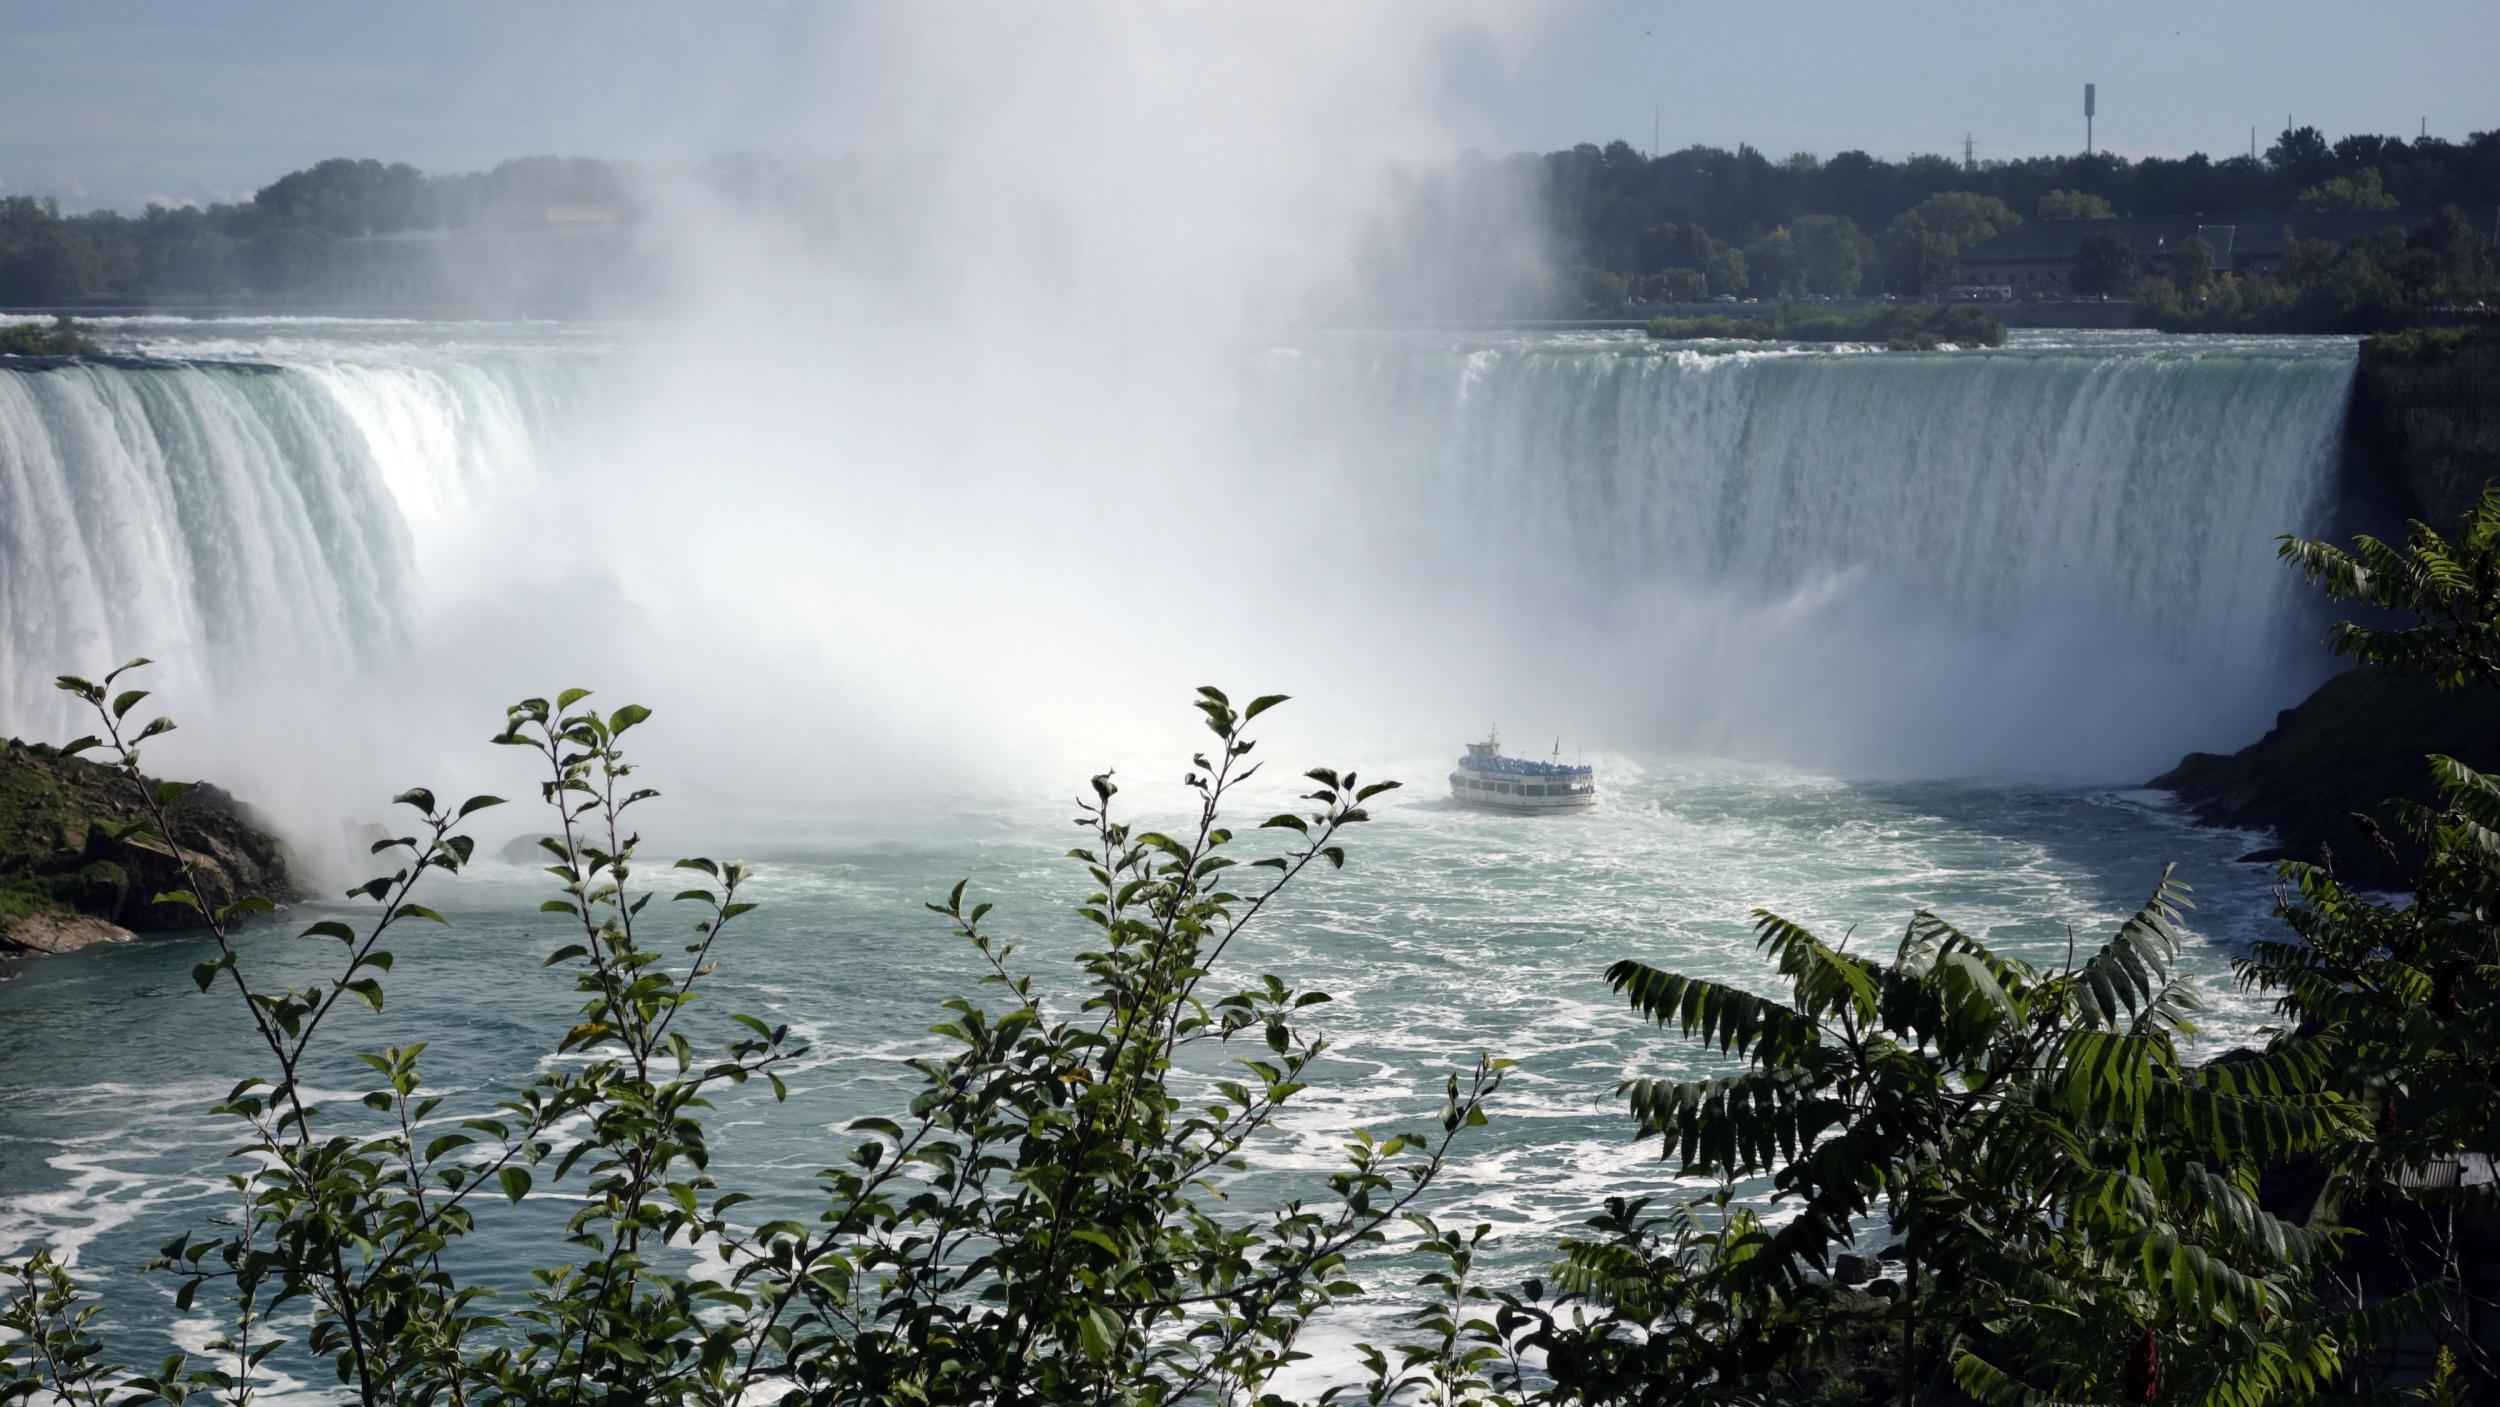 The plan would restrict the flow of water on the US side of the falls